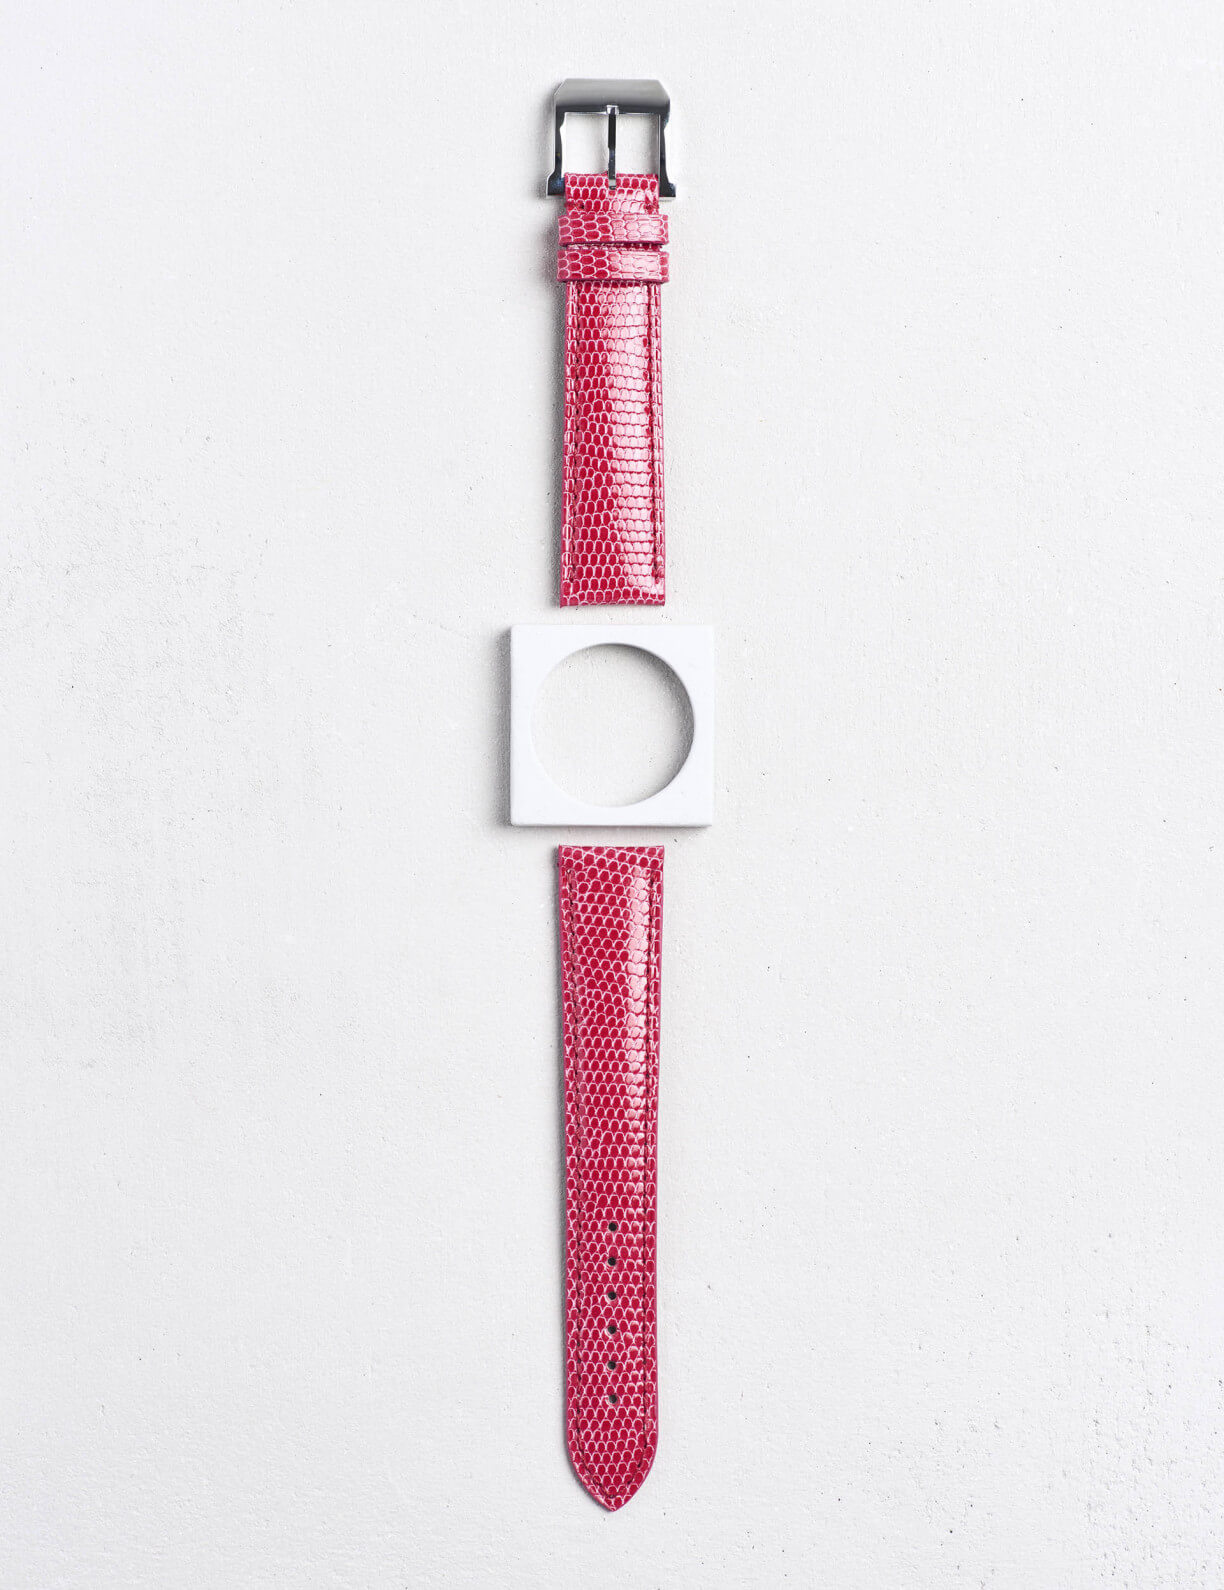 17.01 Watch strap in leather